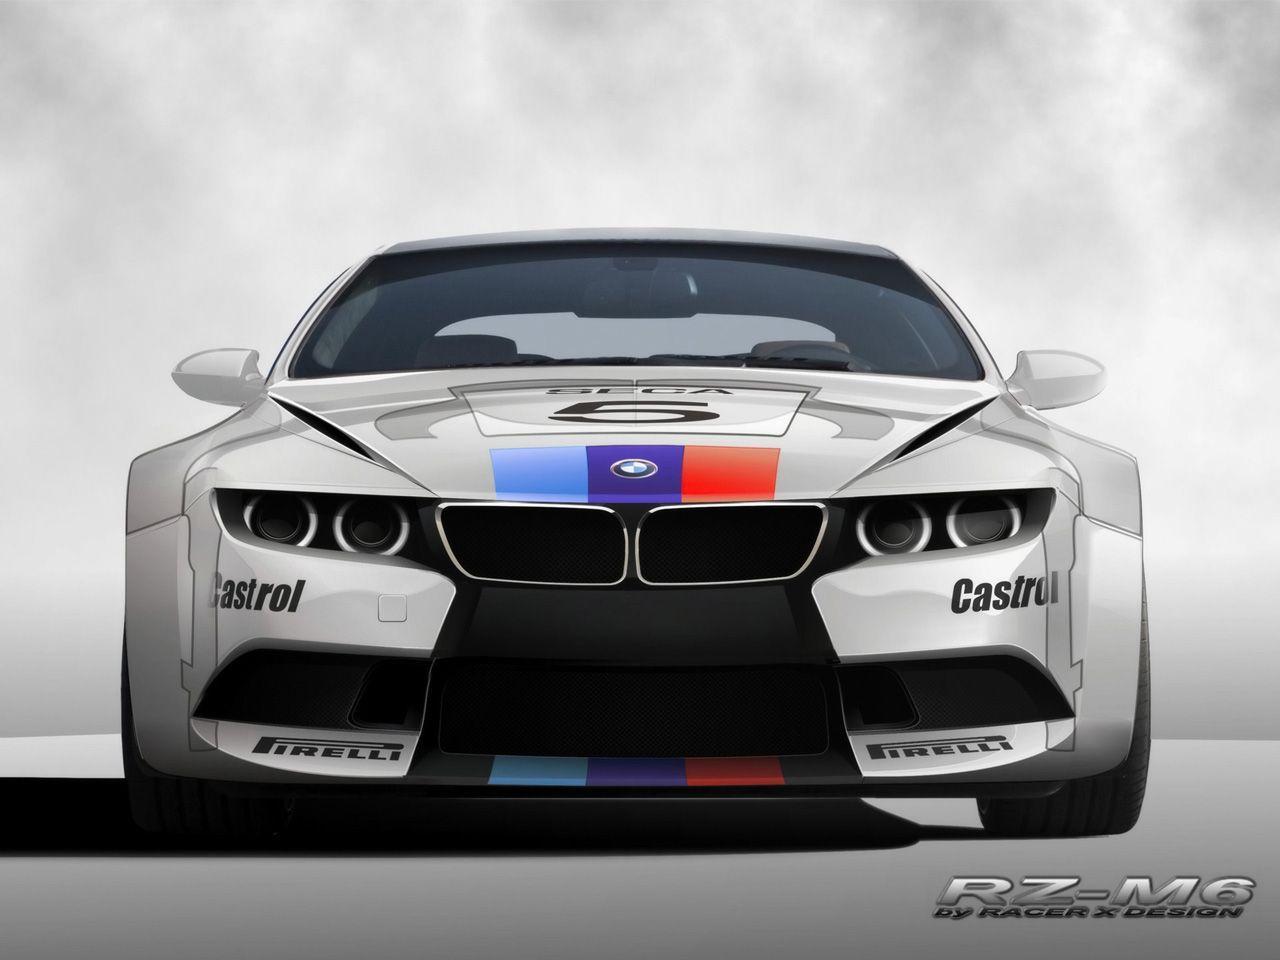 about Car Wallpaper. Cars, BMW